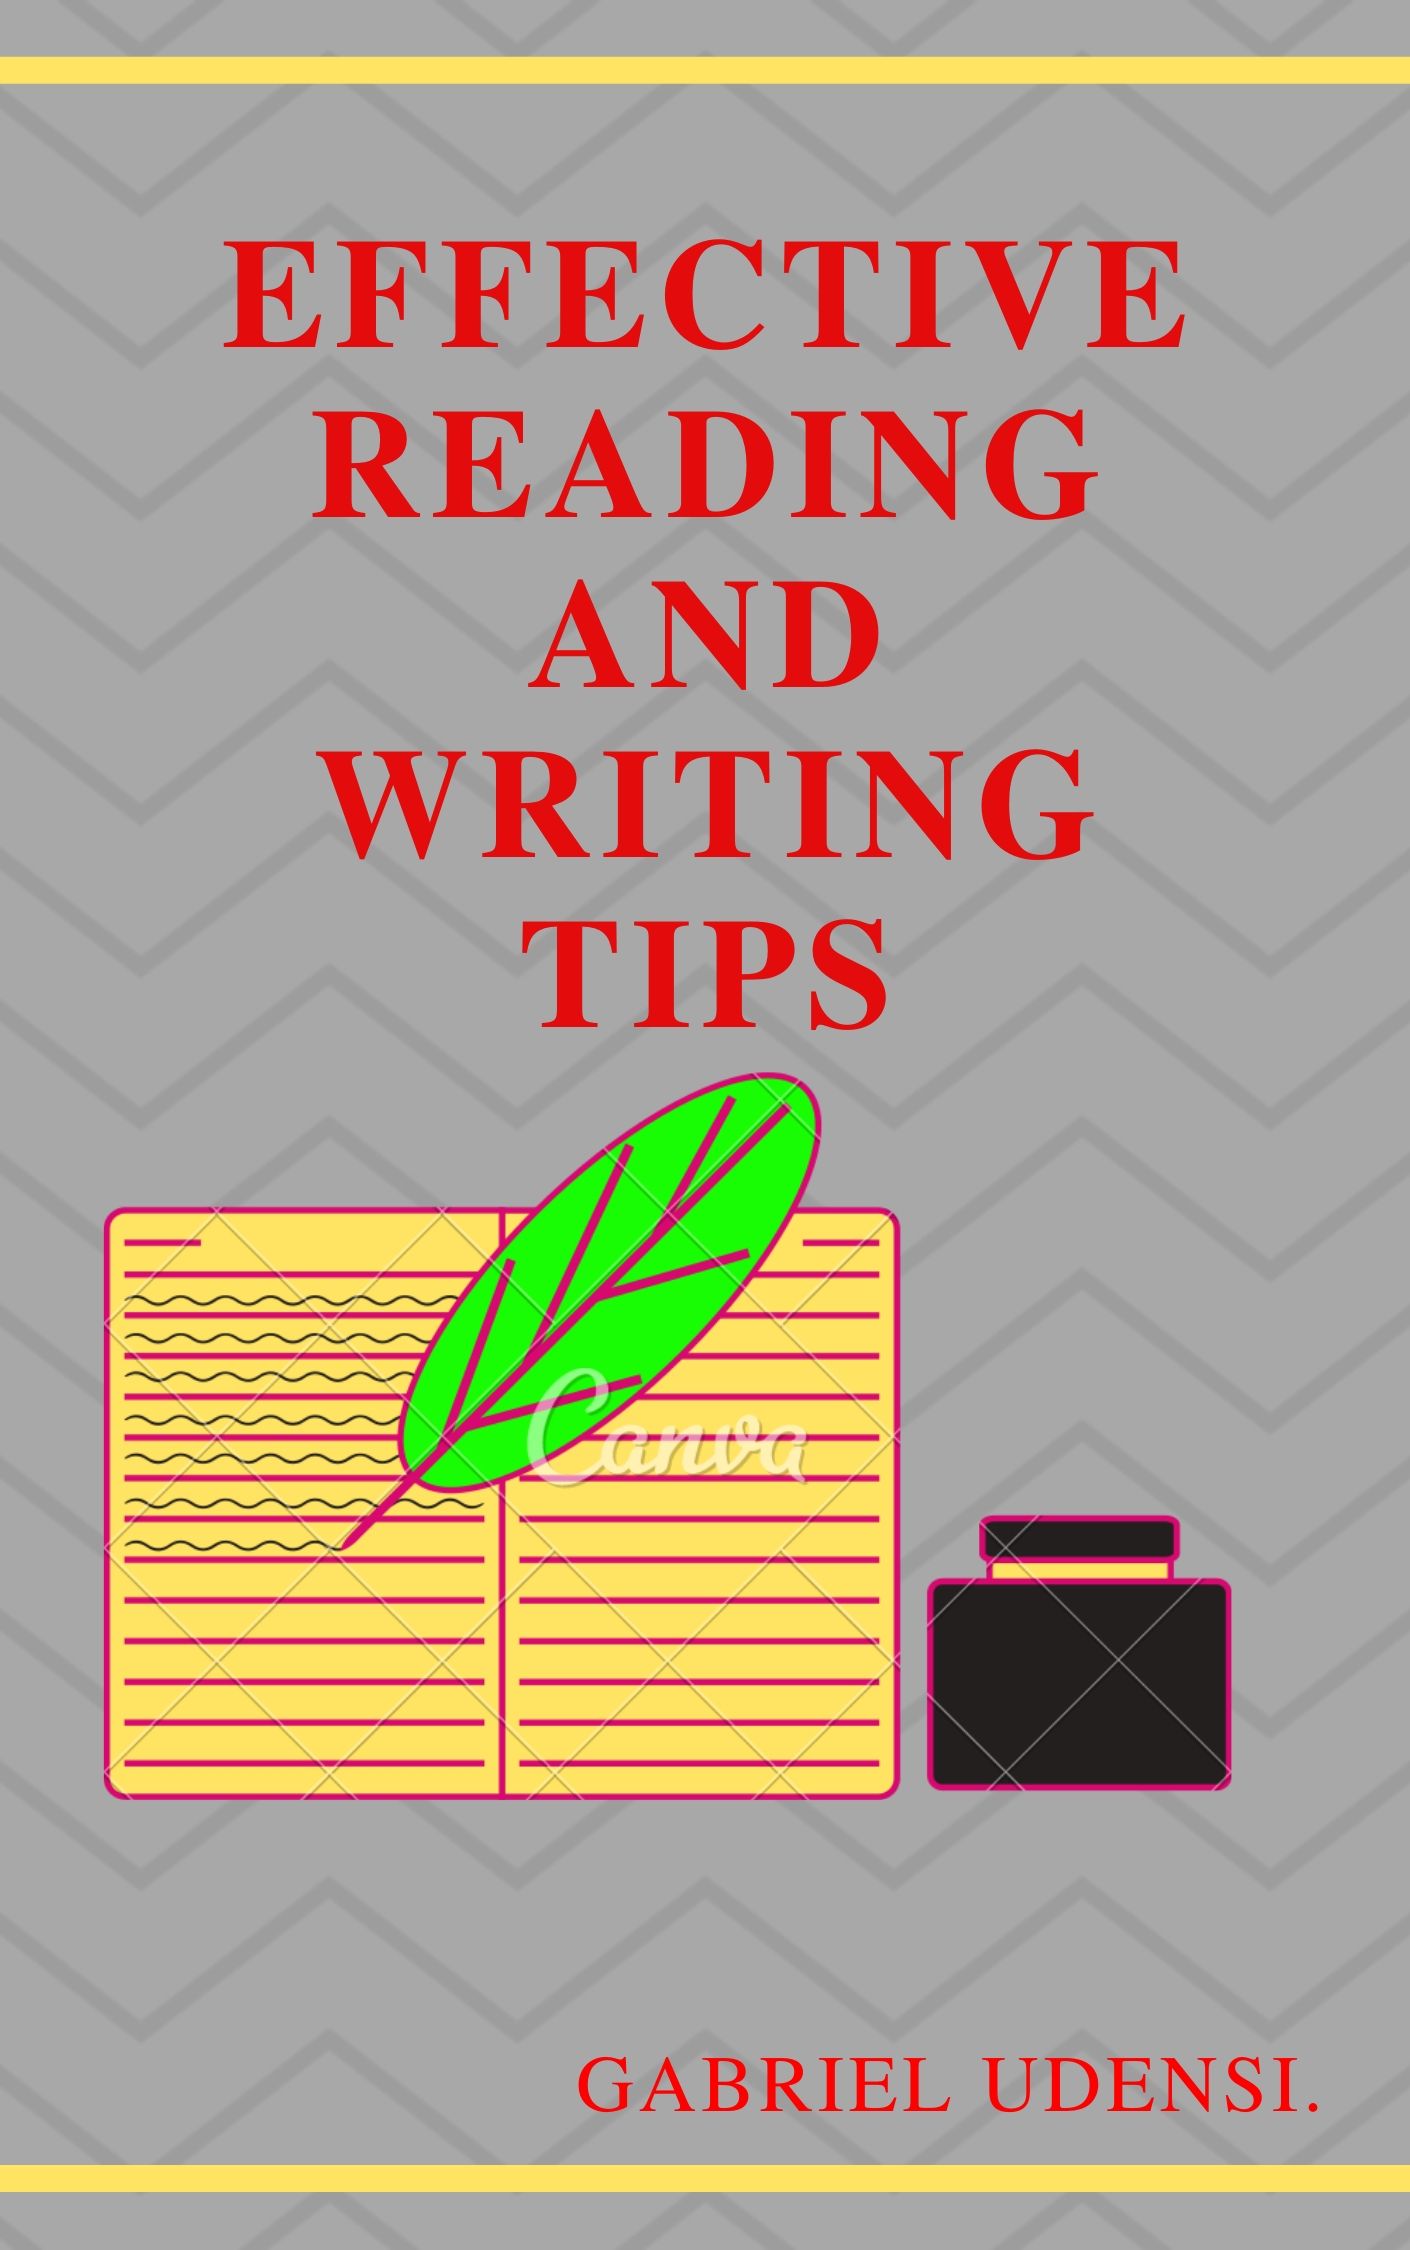 EFFECTIVE READING AND WRITING TIPS